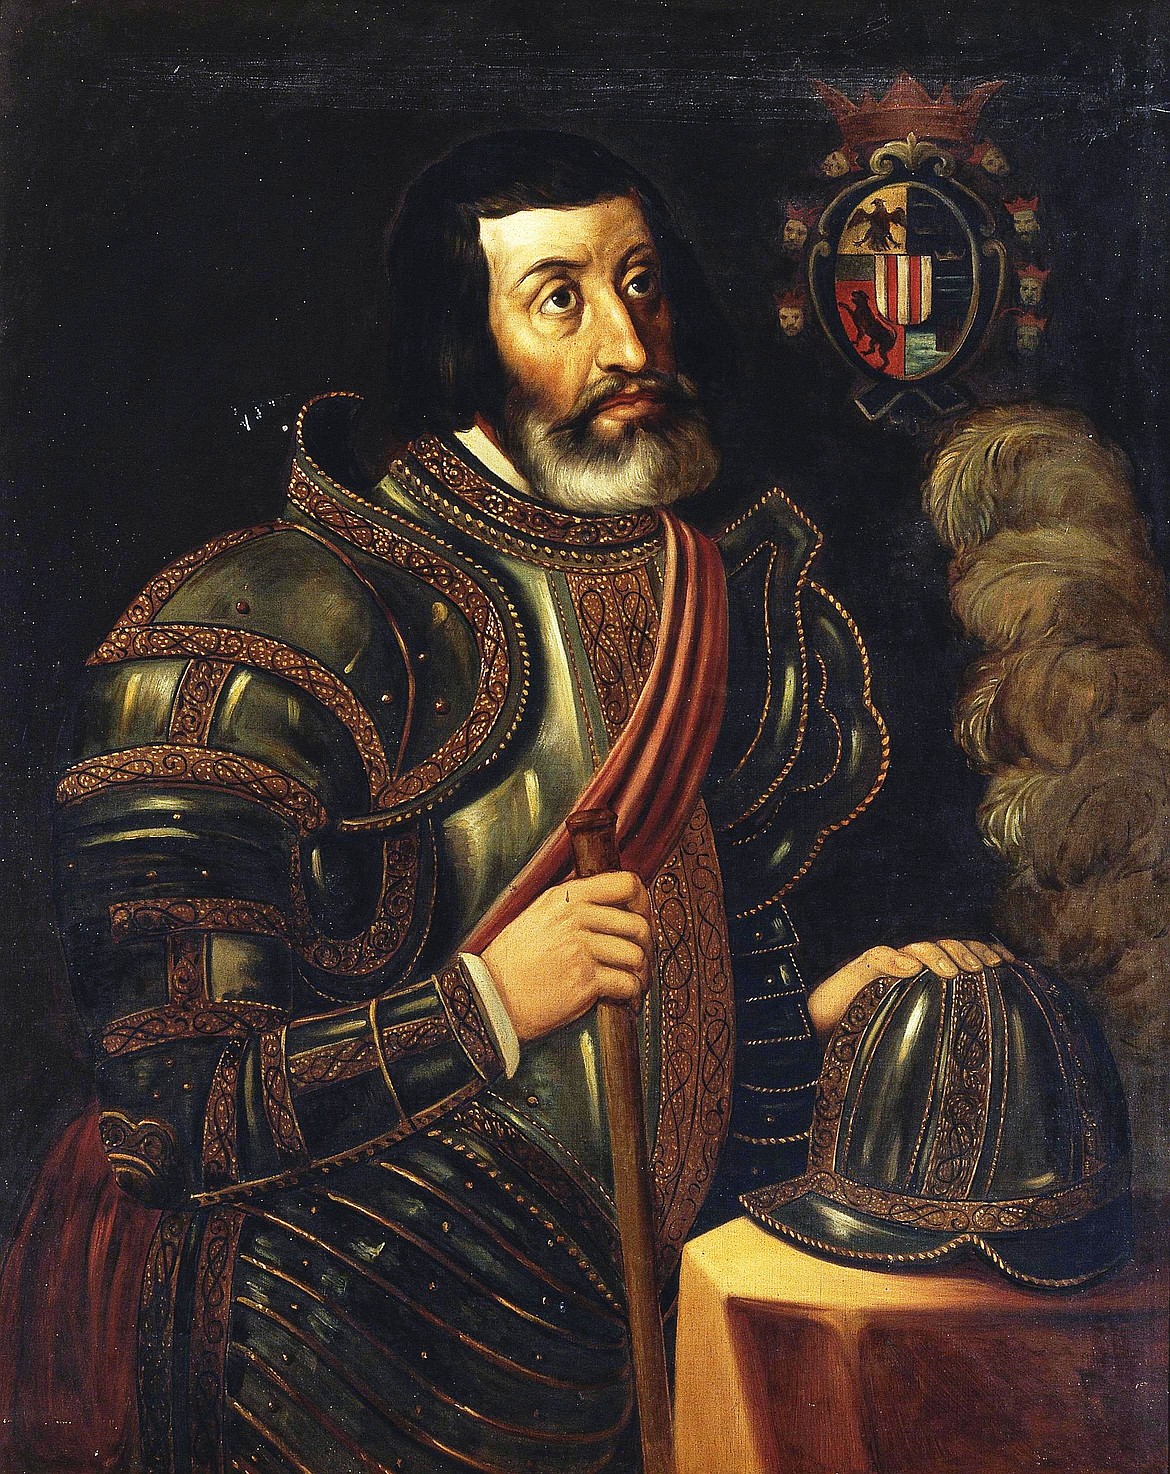 Painting by unknown artist of Spanish conquistador Hernán Cortés (1485-1547).